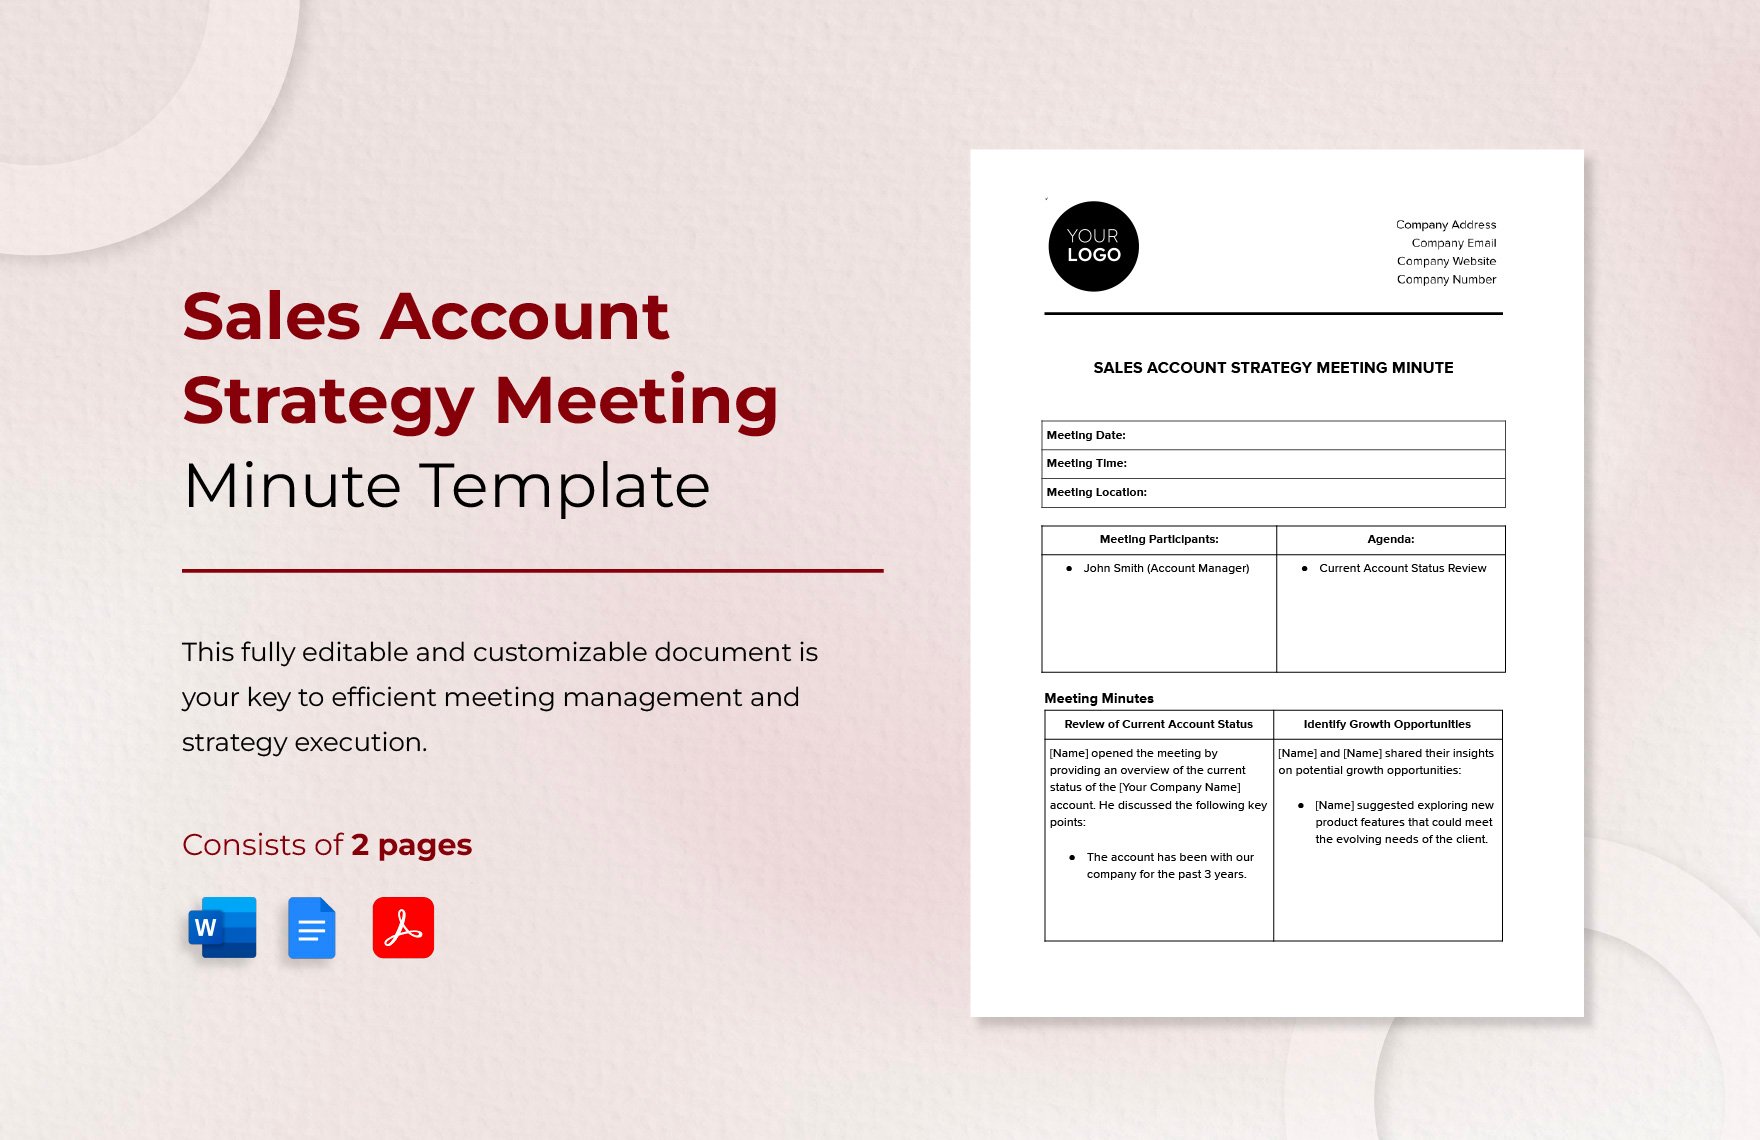 Sales Account Strategy Meeting Minute Template